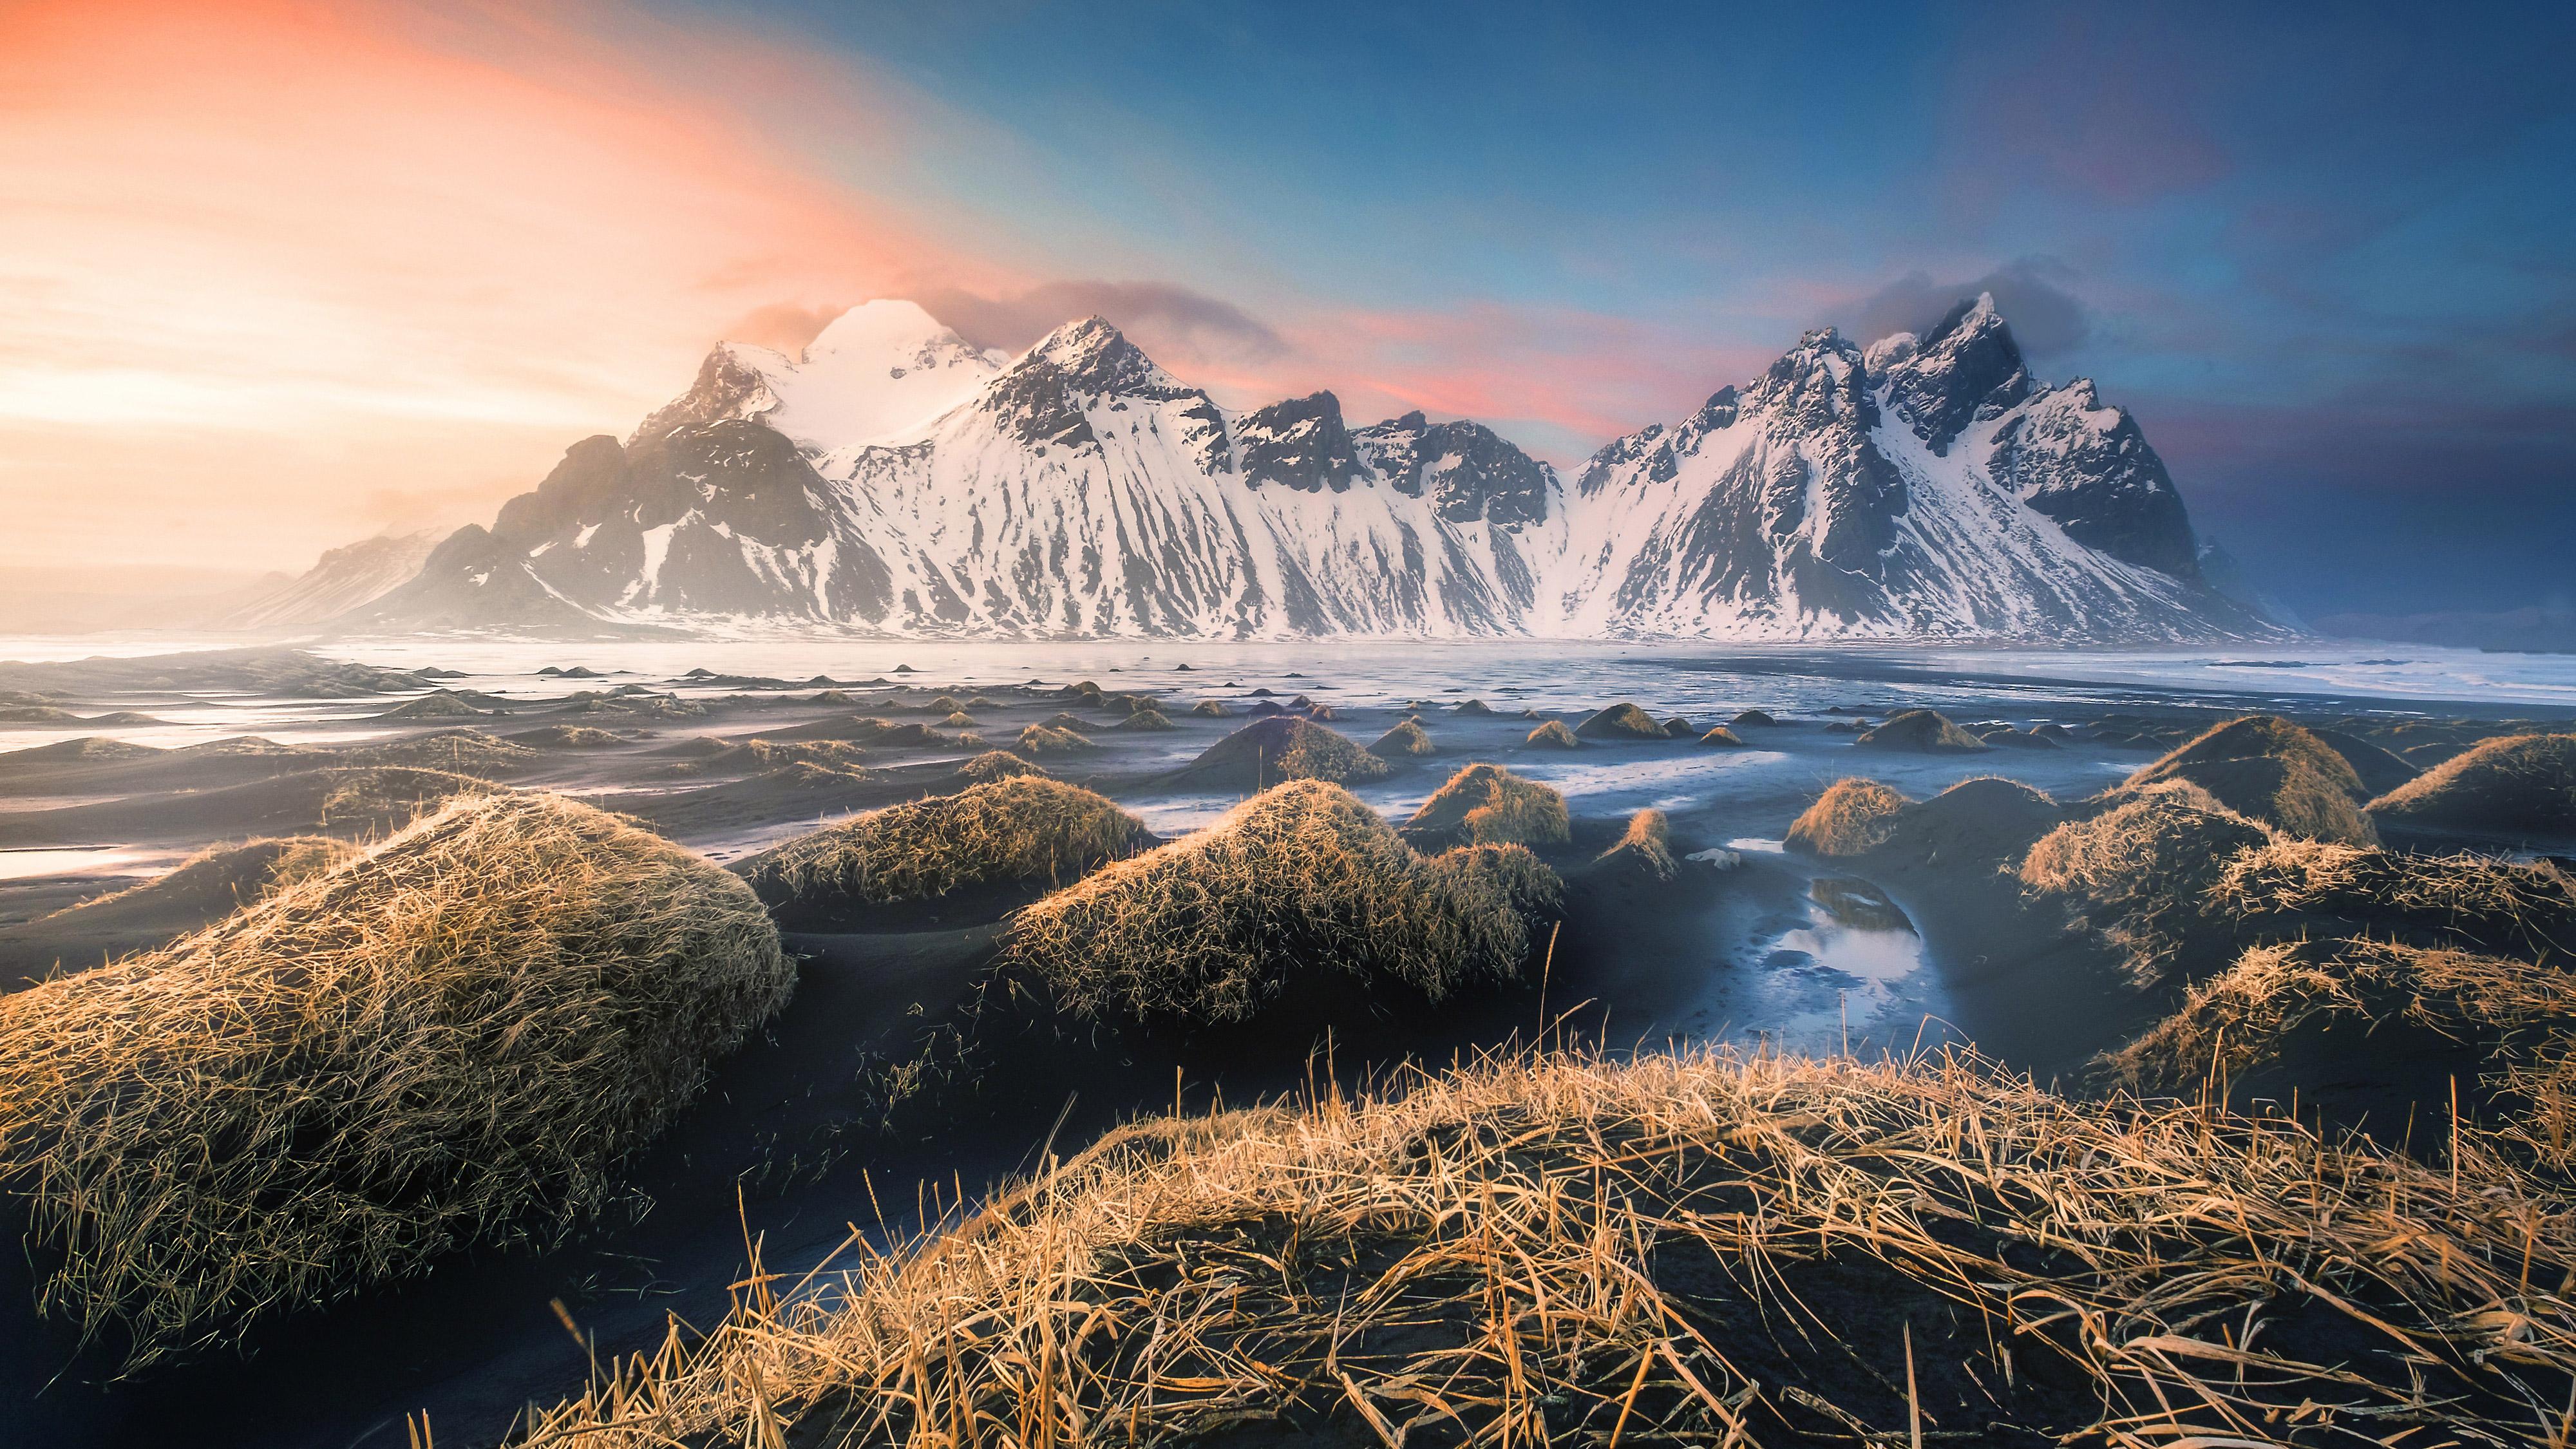 Mountains Iceland 4k, HD Nature, 4k Wallpapers, Image, Backgrounds.